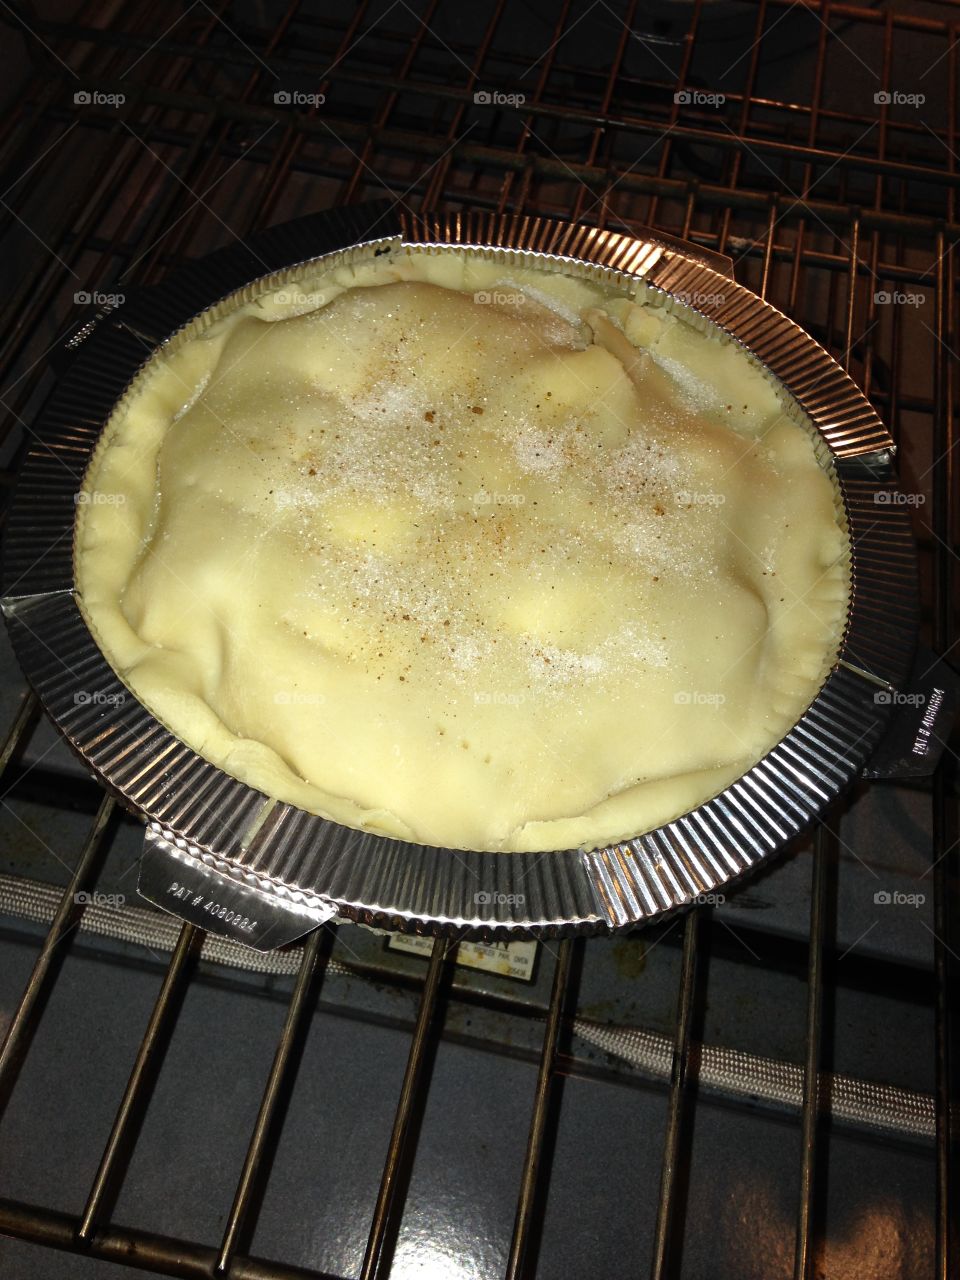 Apple pie ready to go into oven.